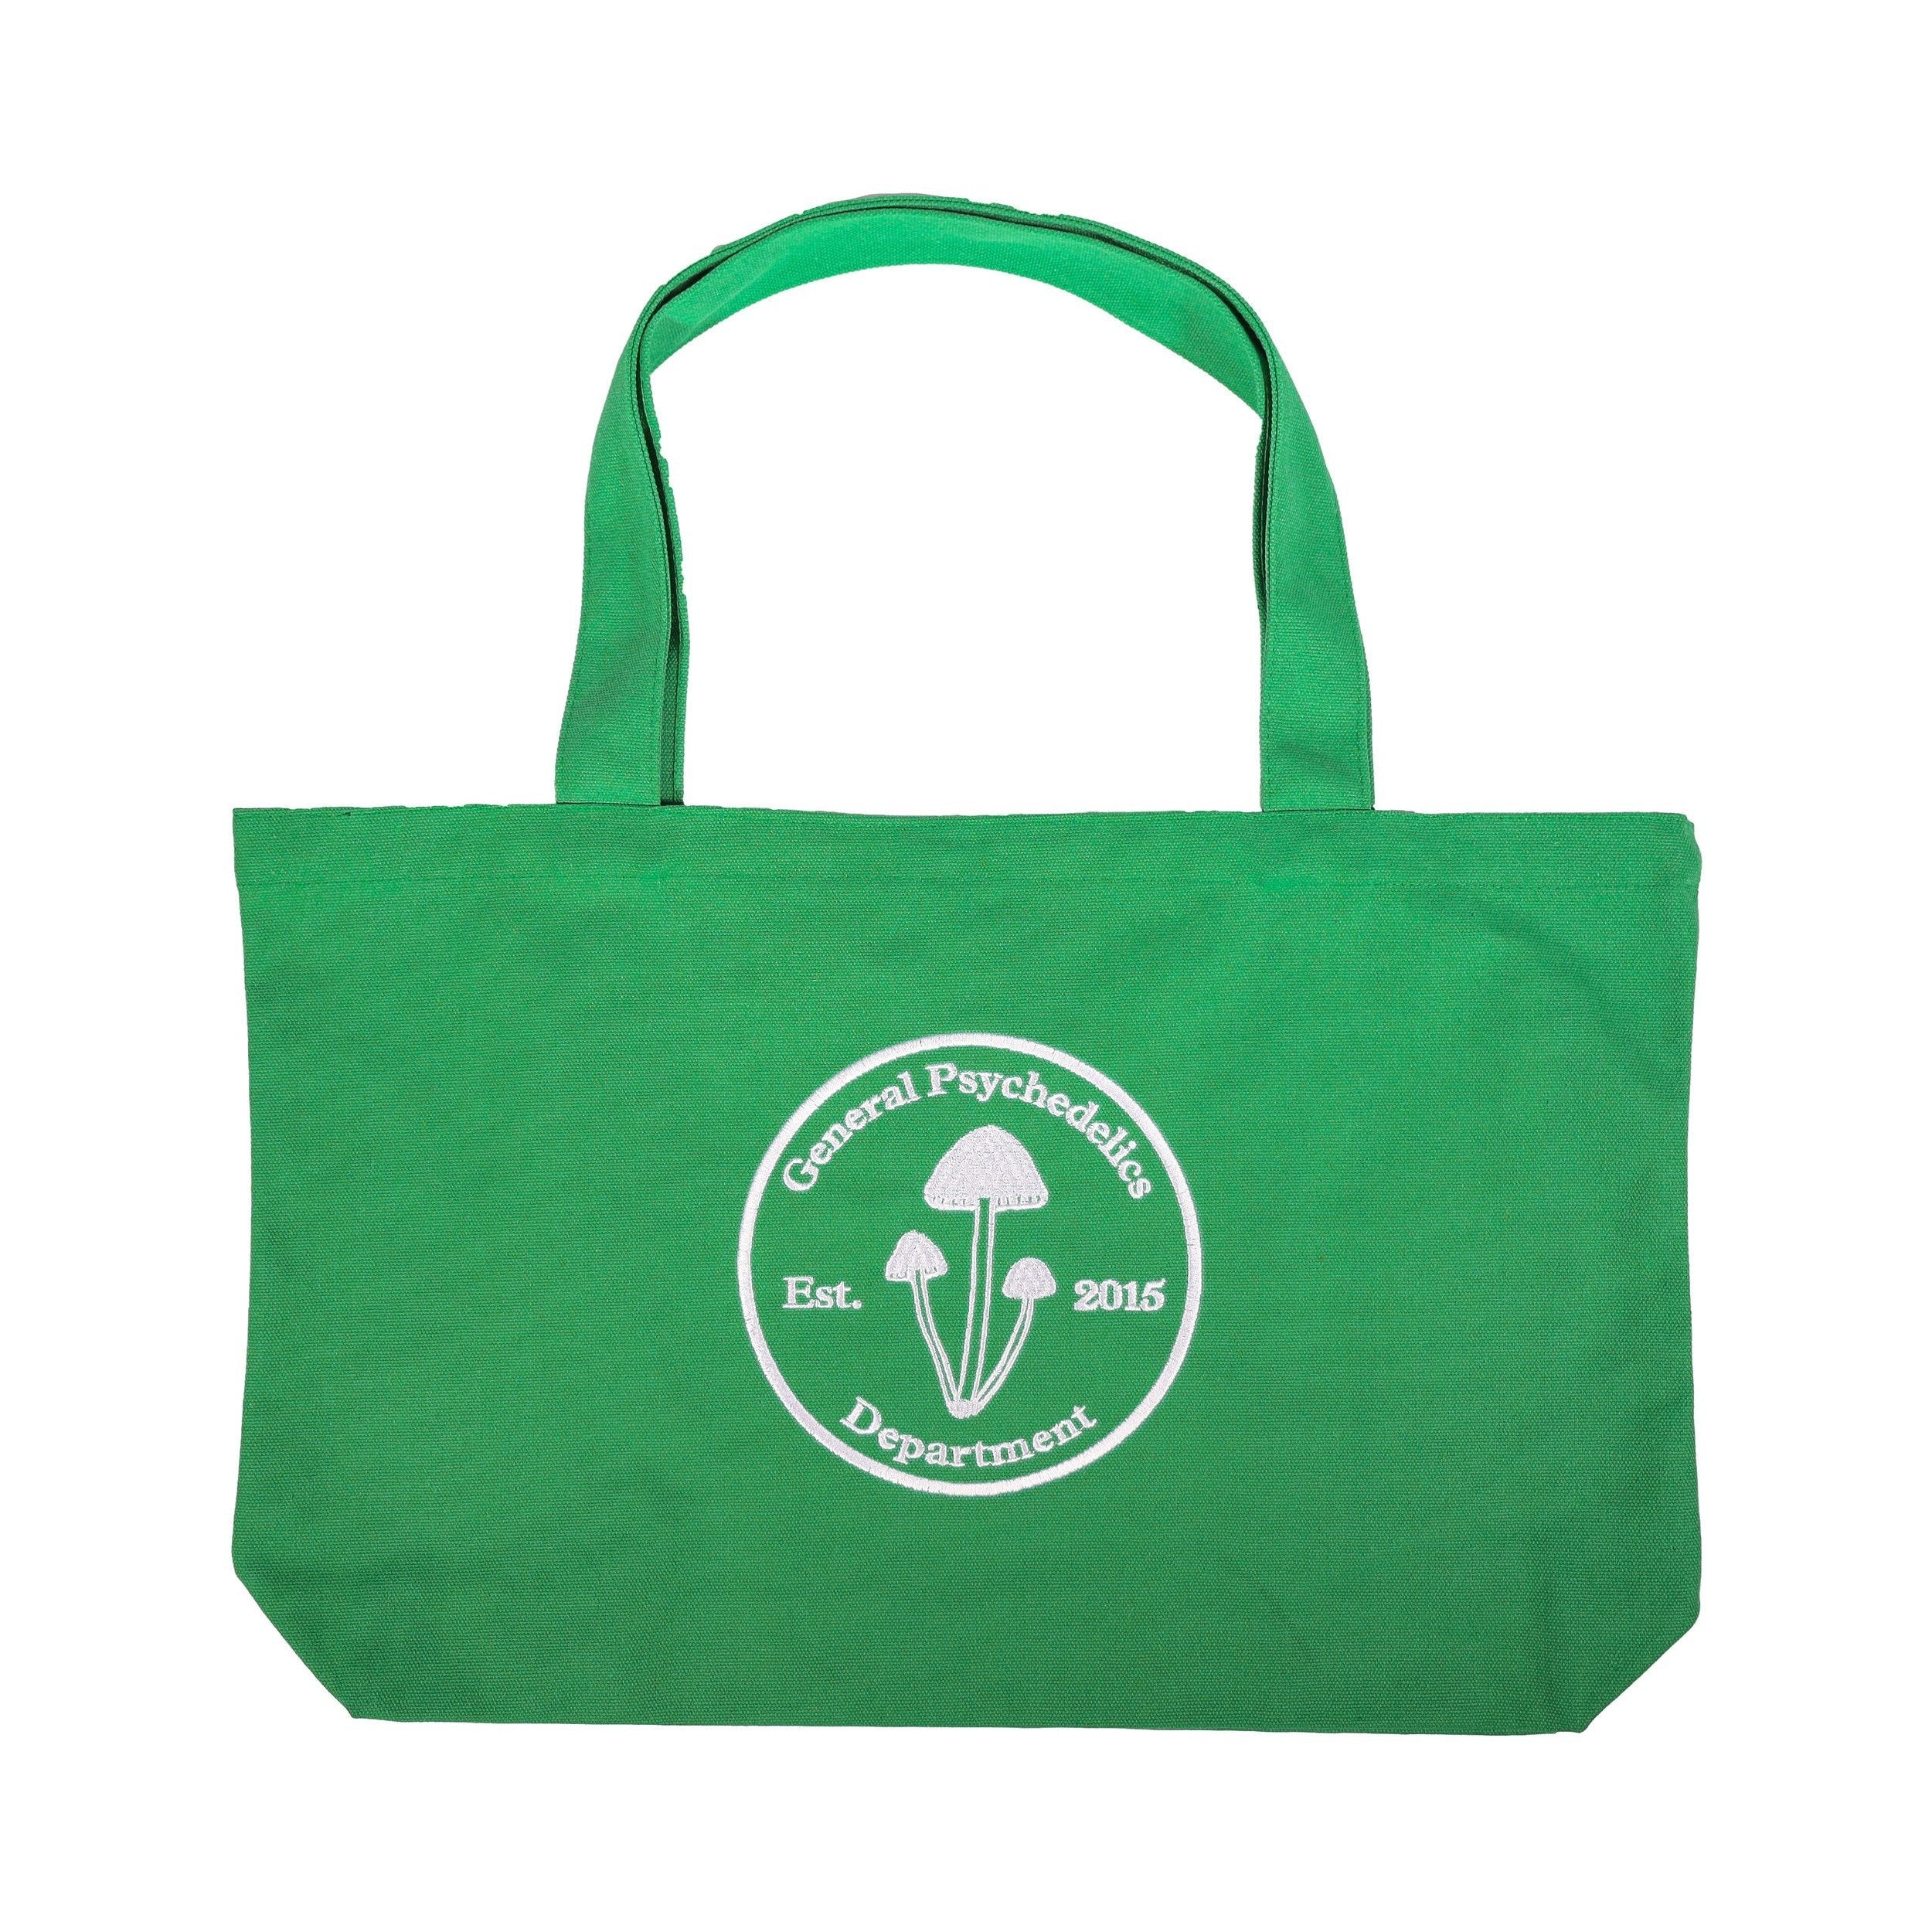 General Psychedelic Department Tote - Green-Mister Green-Mister Green